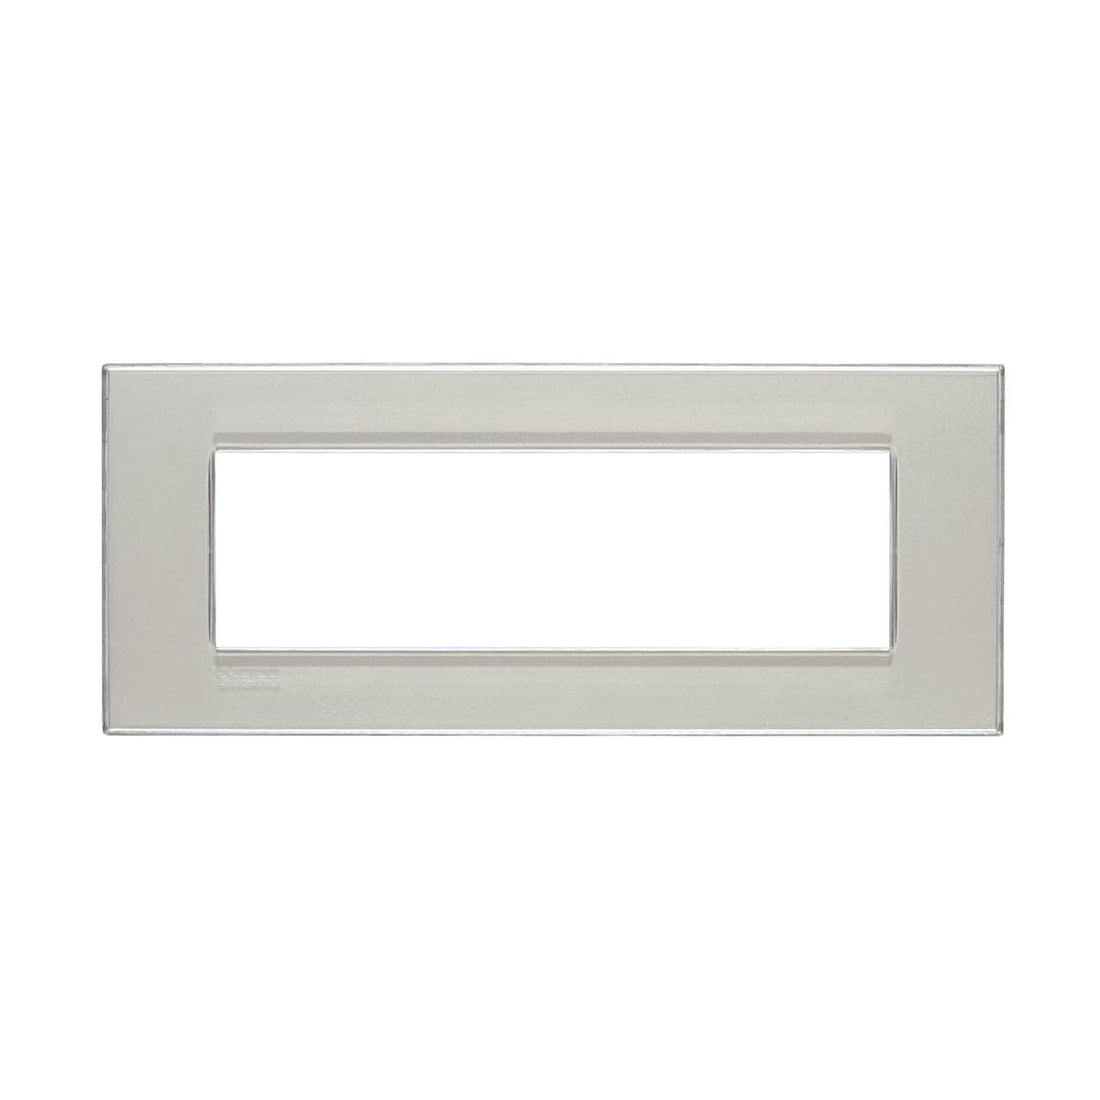 LIVING LIGHT PLATE 7 PLACES ICE GREY - best price from Maltashopper.com BR420001382